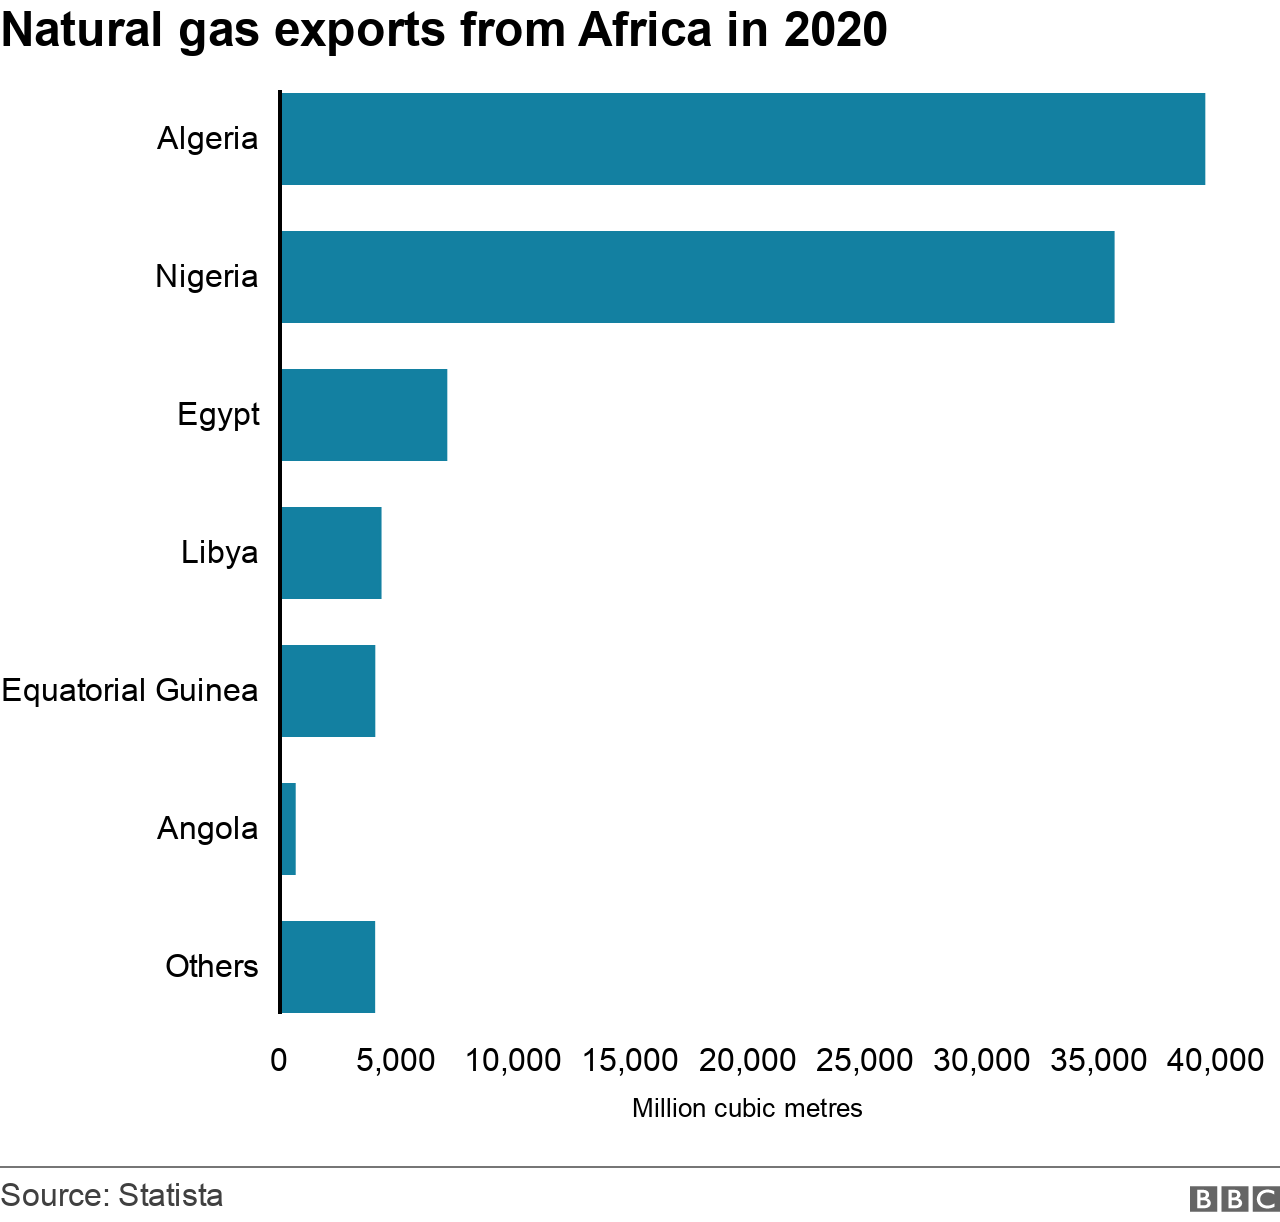 A chart showing natural gas exports from Africa in 2020